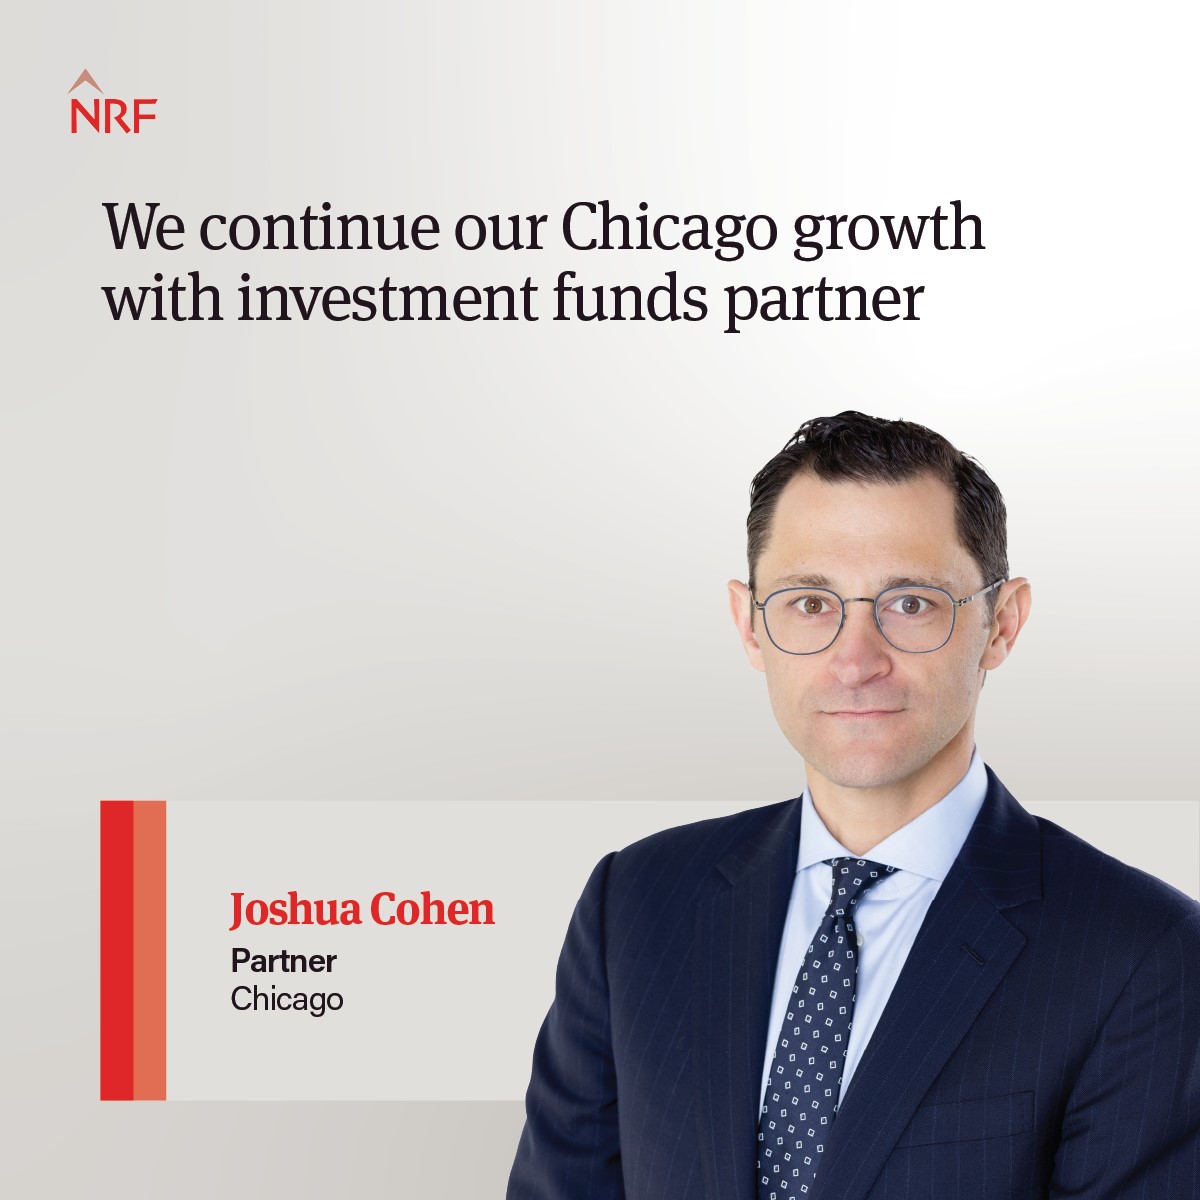 Investment funds lawyer Joshua Cohen has joined our Chicago office as a partner. ow.ly/QVnF50RlfTx